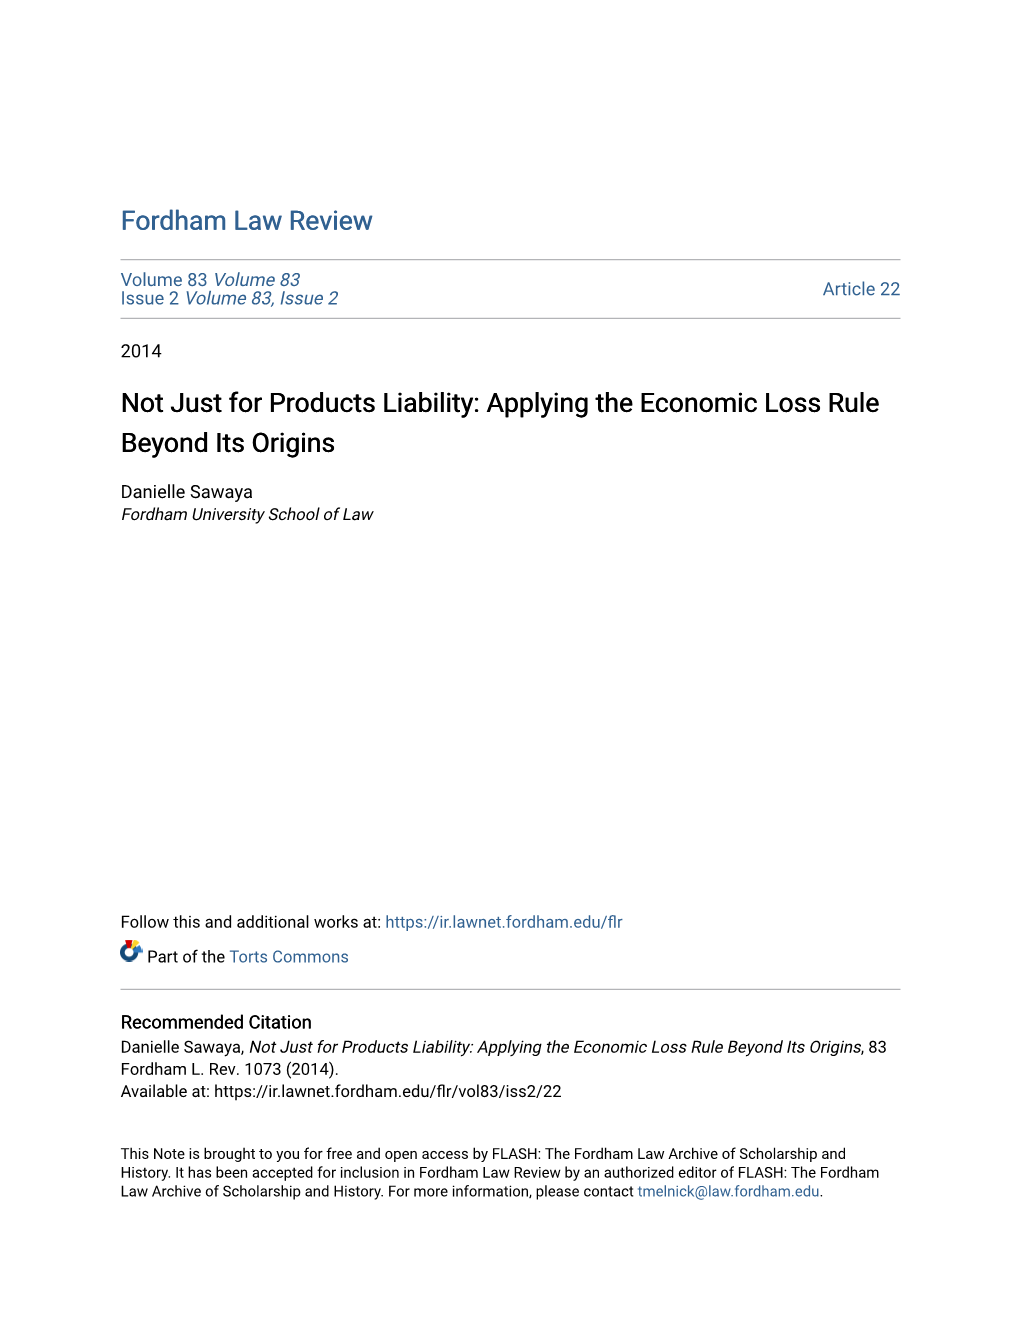 Not Just for Products Liability: Applying the Economic Loss Rule Beyond Its Origins